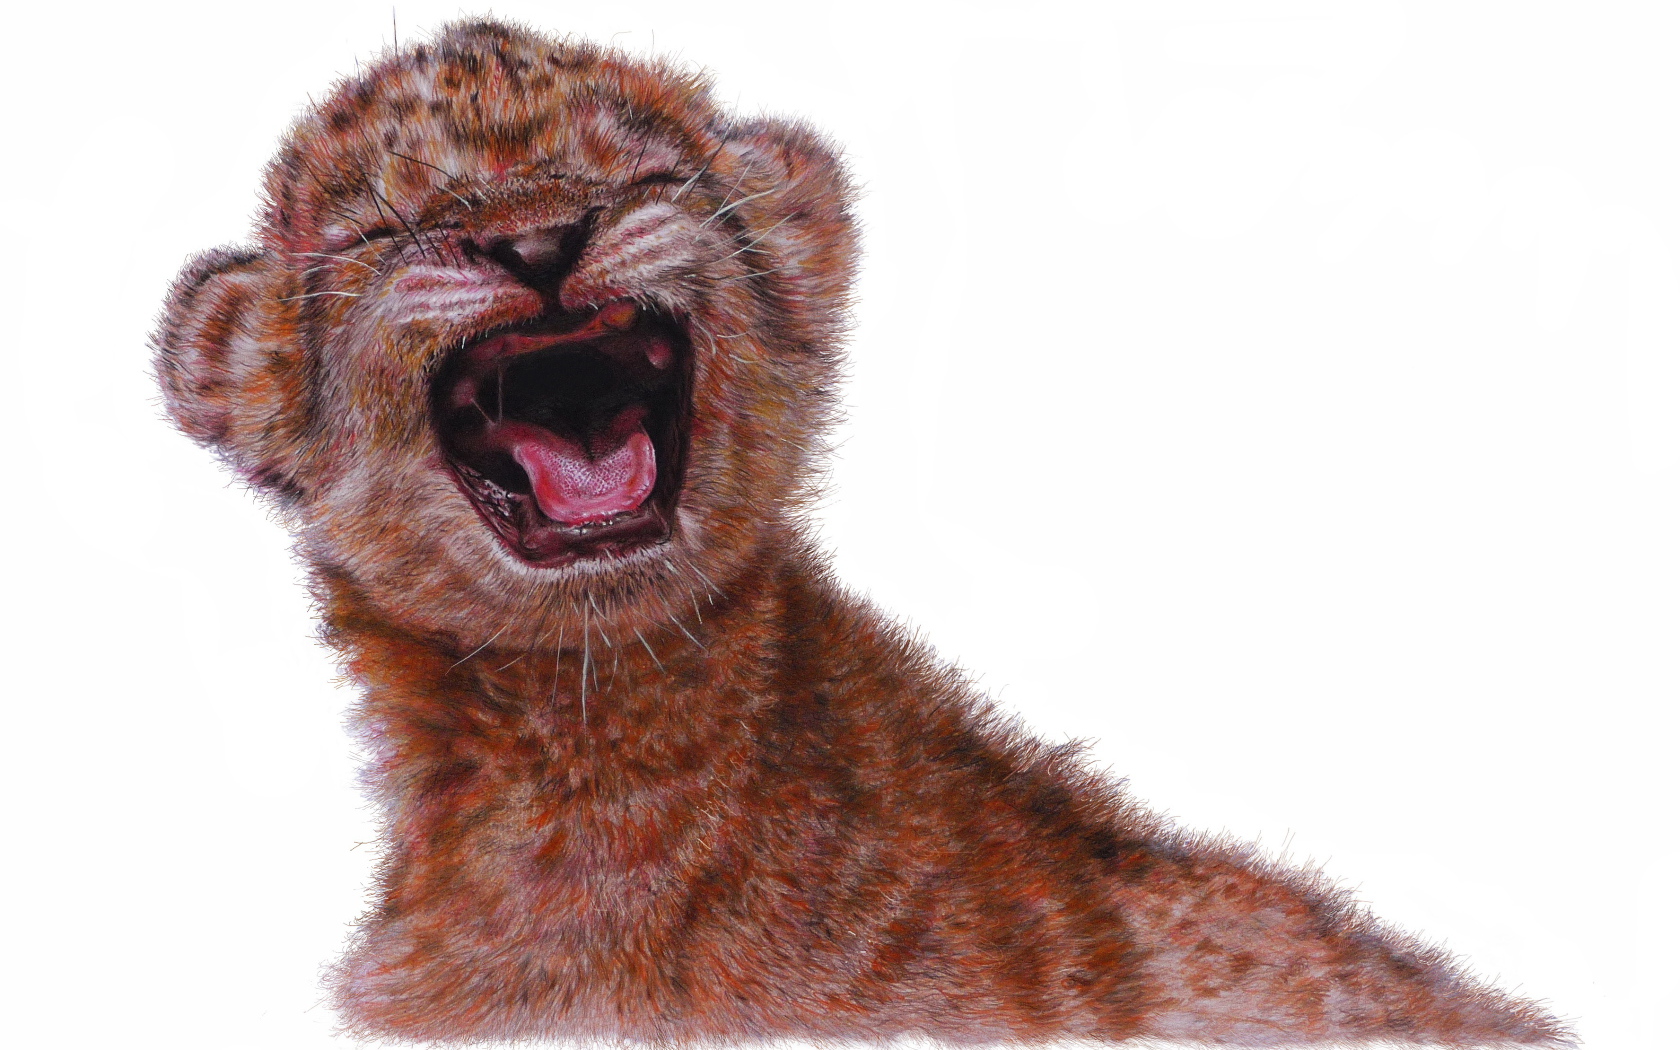 Painted little lion cub on white background